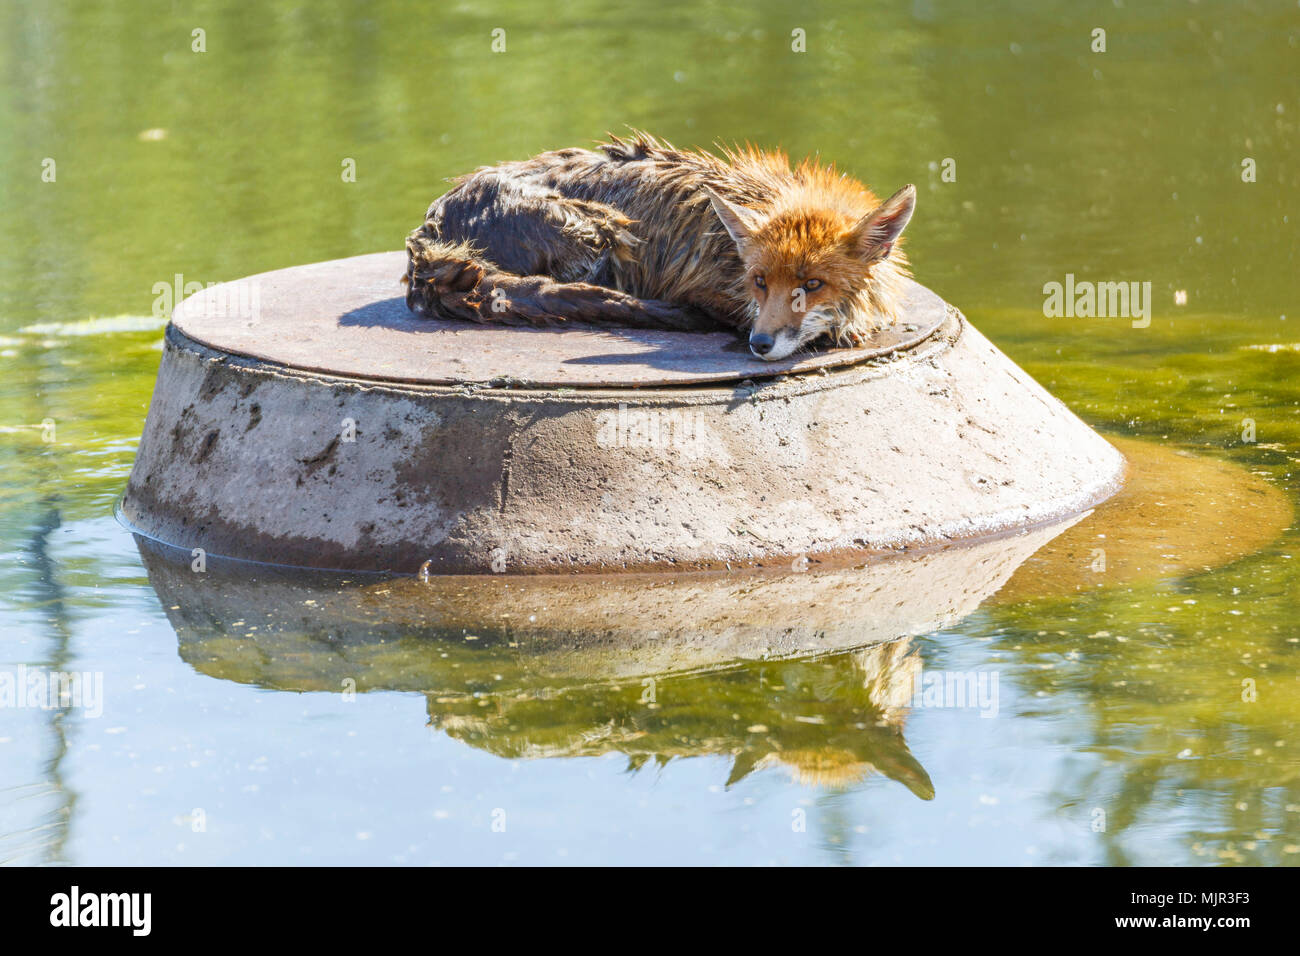 Oelsnitz, Germany, 06 May 2018. A fox lying on a manhole cover in an irrigation pool. Since the pool is currently not completely full, the fox was unable to climb out over the smooth pond liner. The fox was rescued by two firefighters in a rubber dinghy. Photo: Jens Uhlig/Jens Uhlig/dpa Credit: dpa picture alliance/Alamy Live News Stock Photo